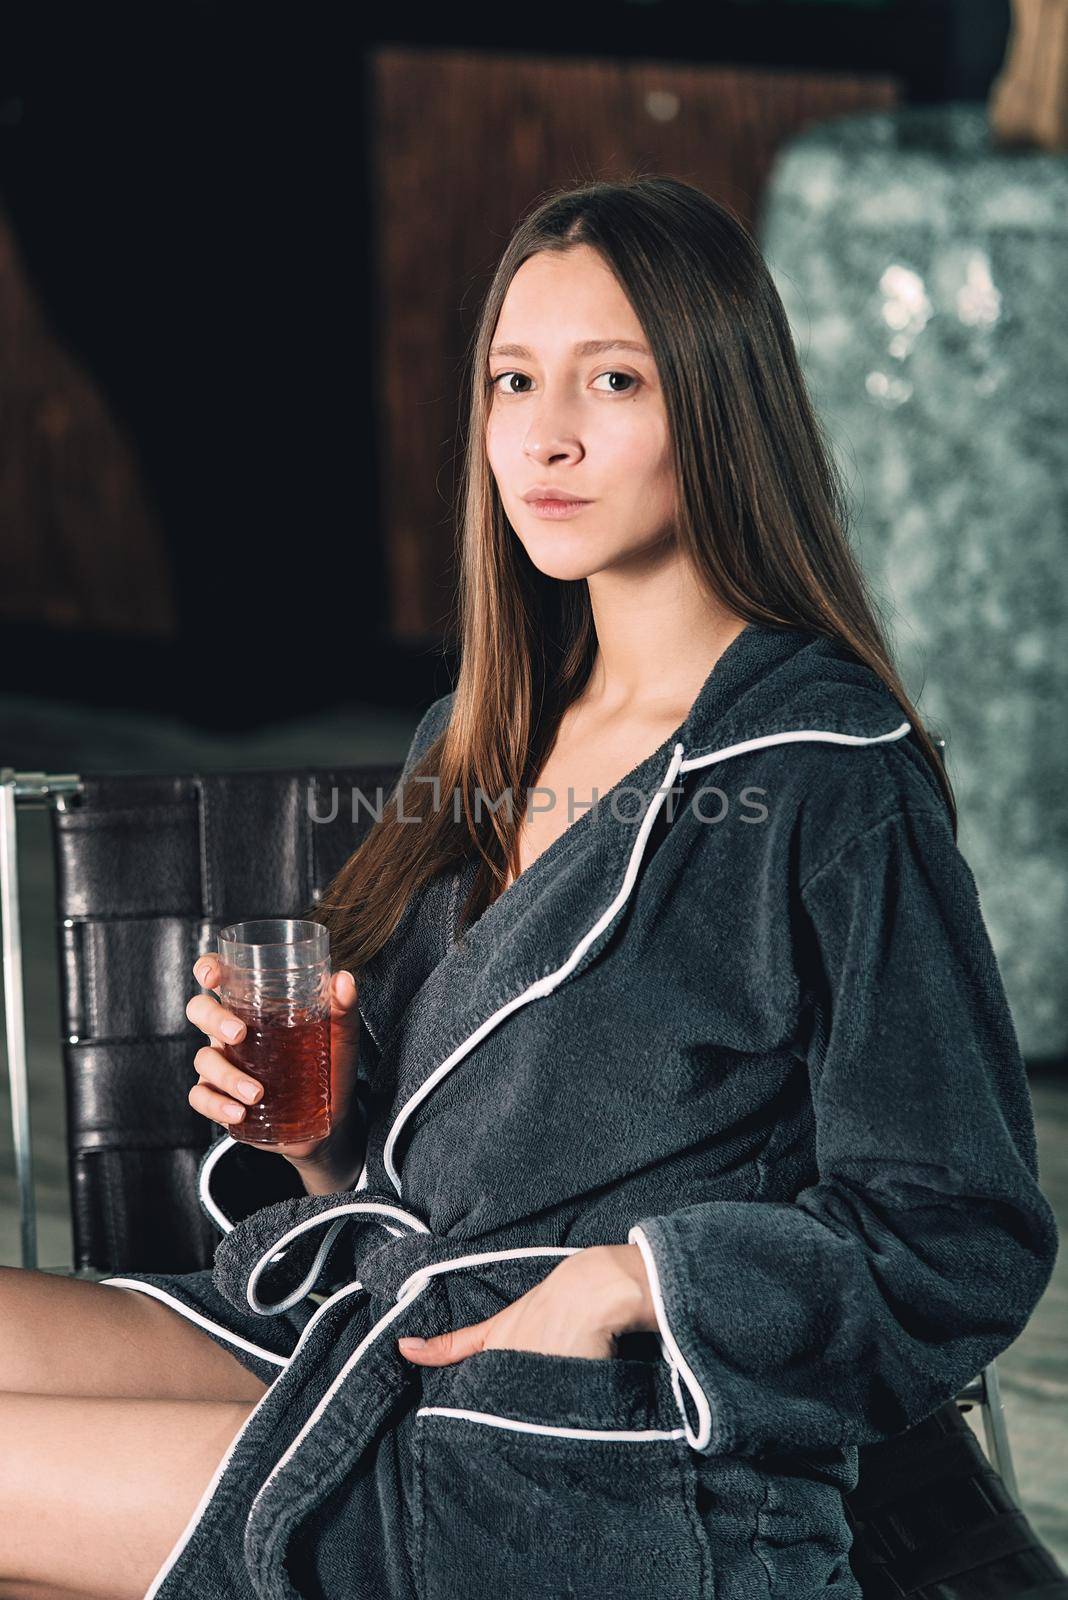 Portrait of young beautiful woman relaxing in a chair in a bathrobe with a detox drink in a hand. Luxery spa center. look at the camera